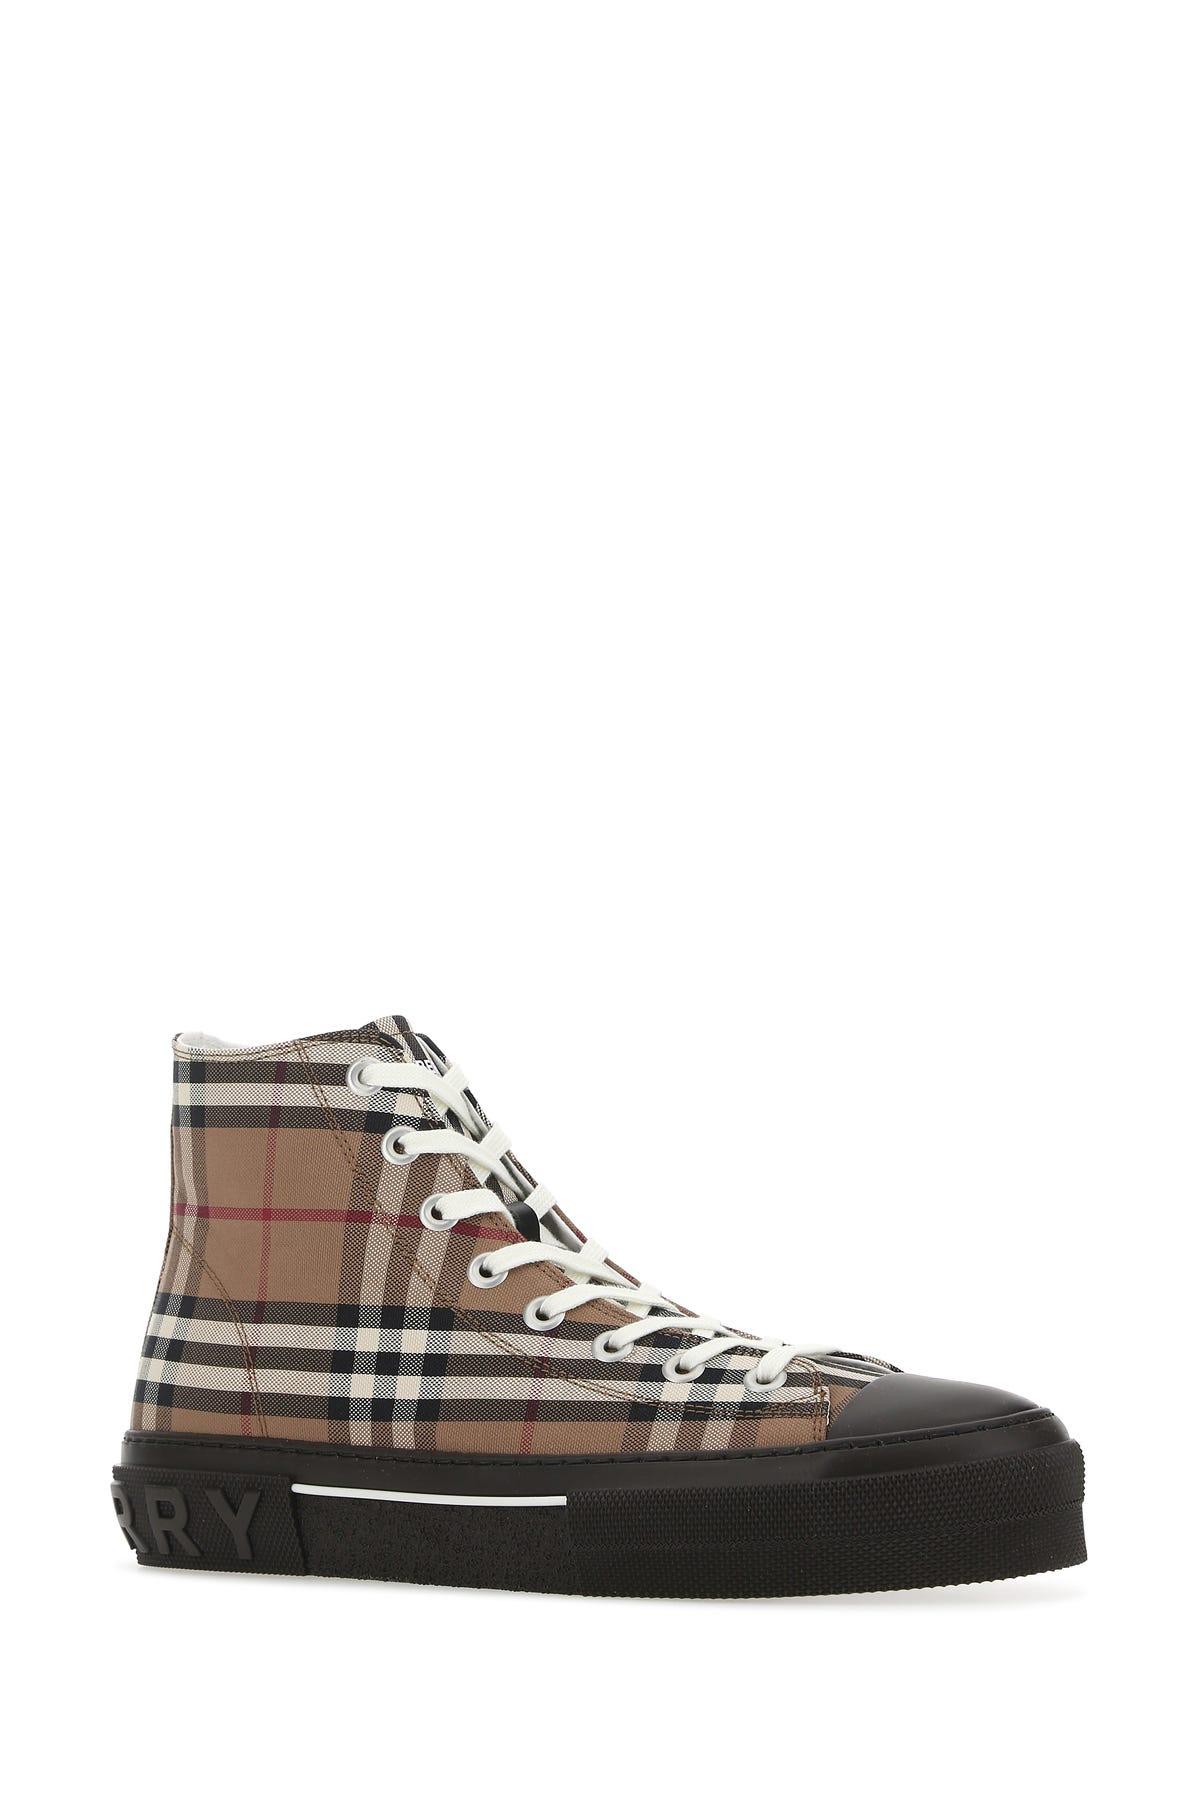 Burberry Embroidered Canvas Sneakers for Men | Lyst